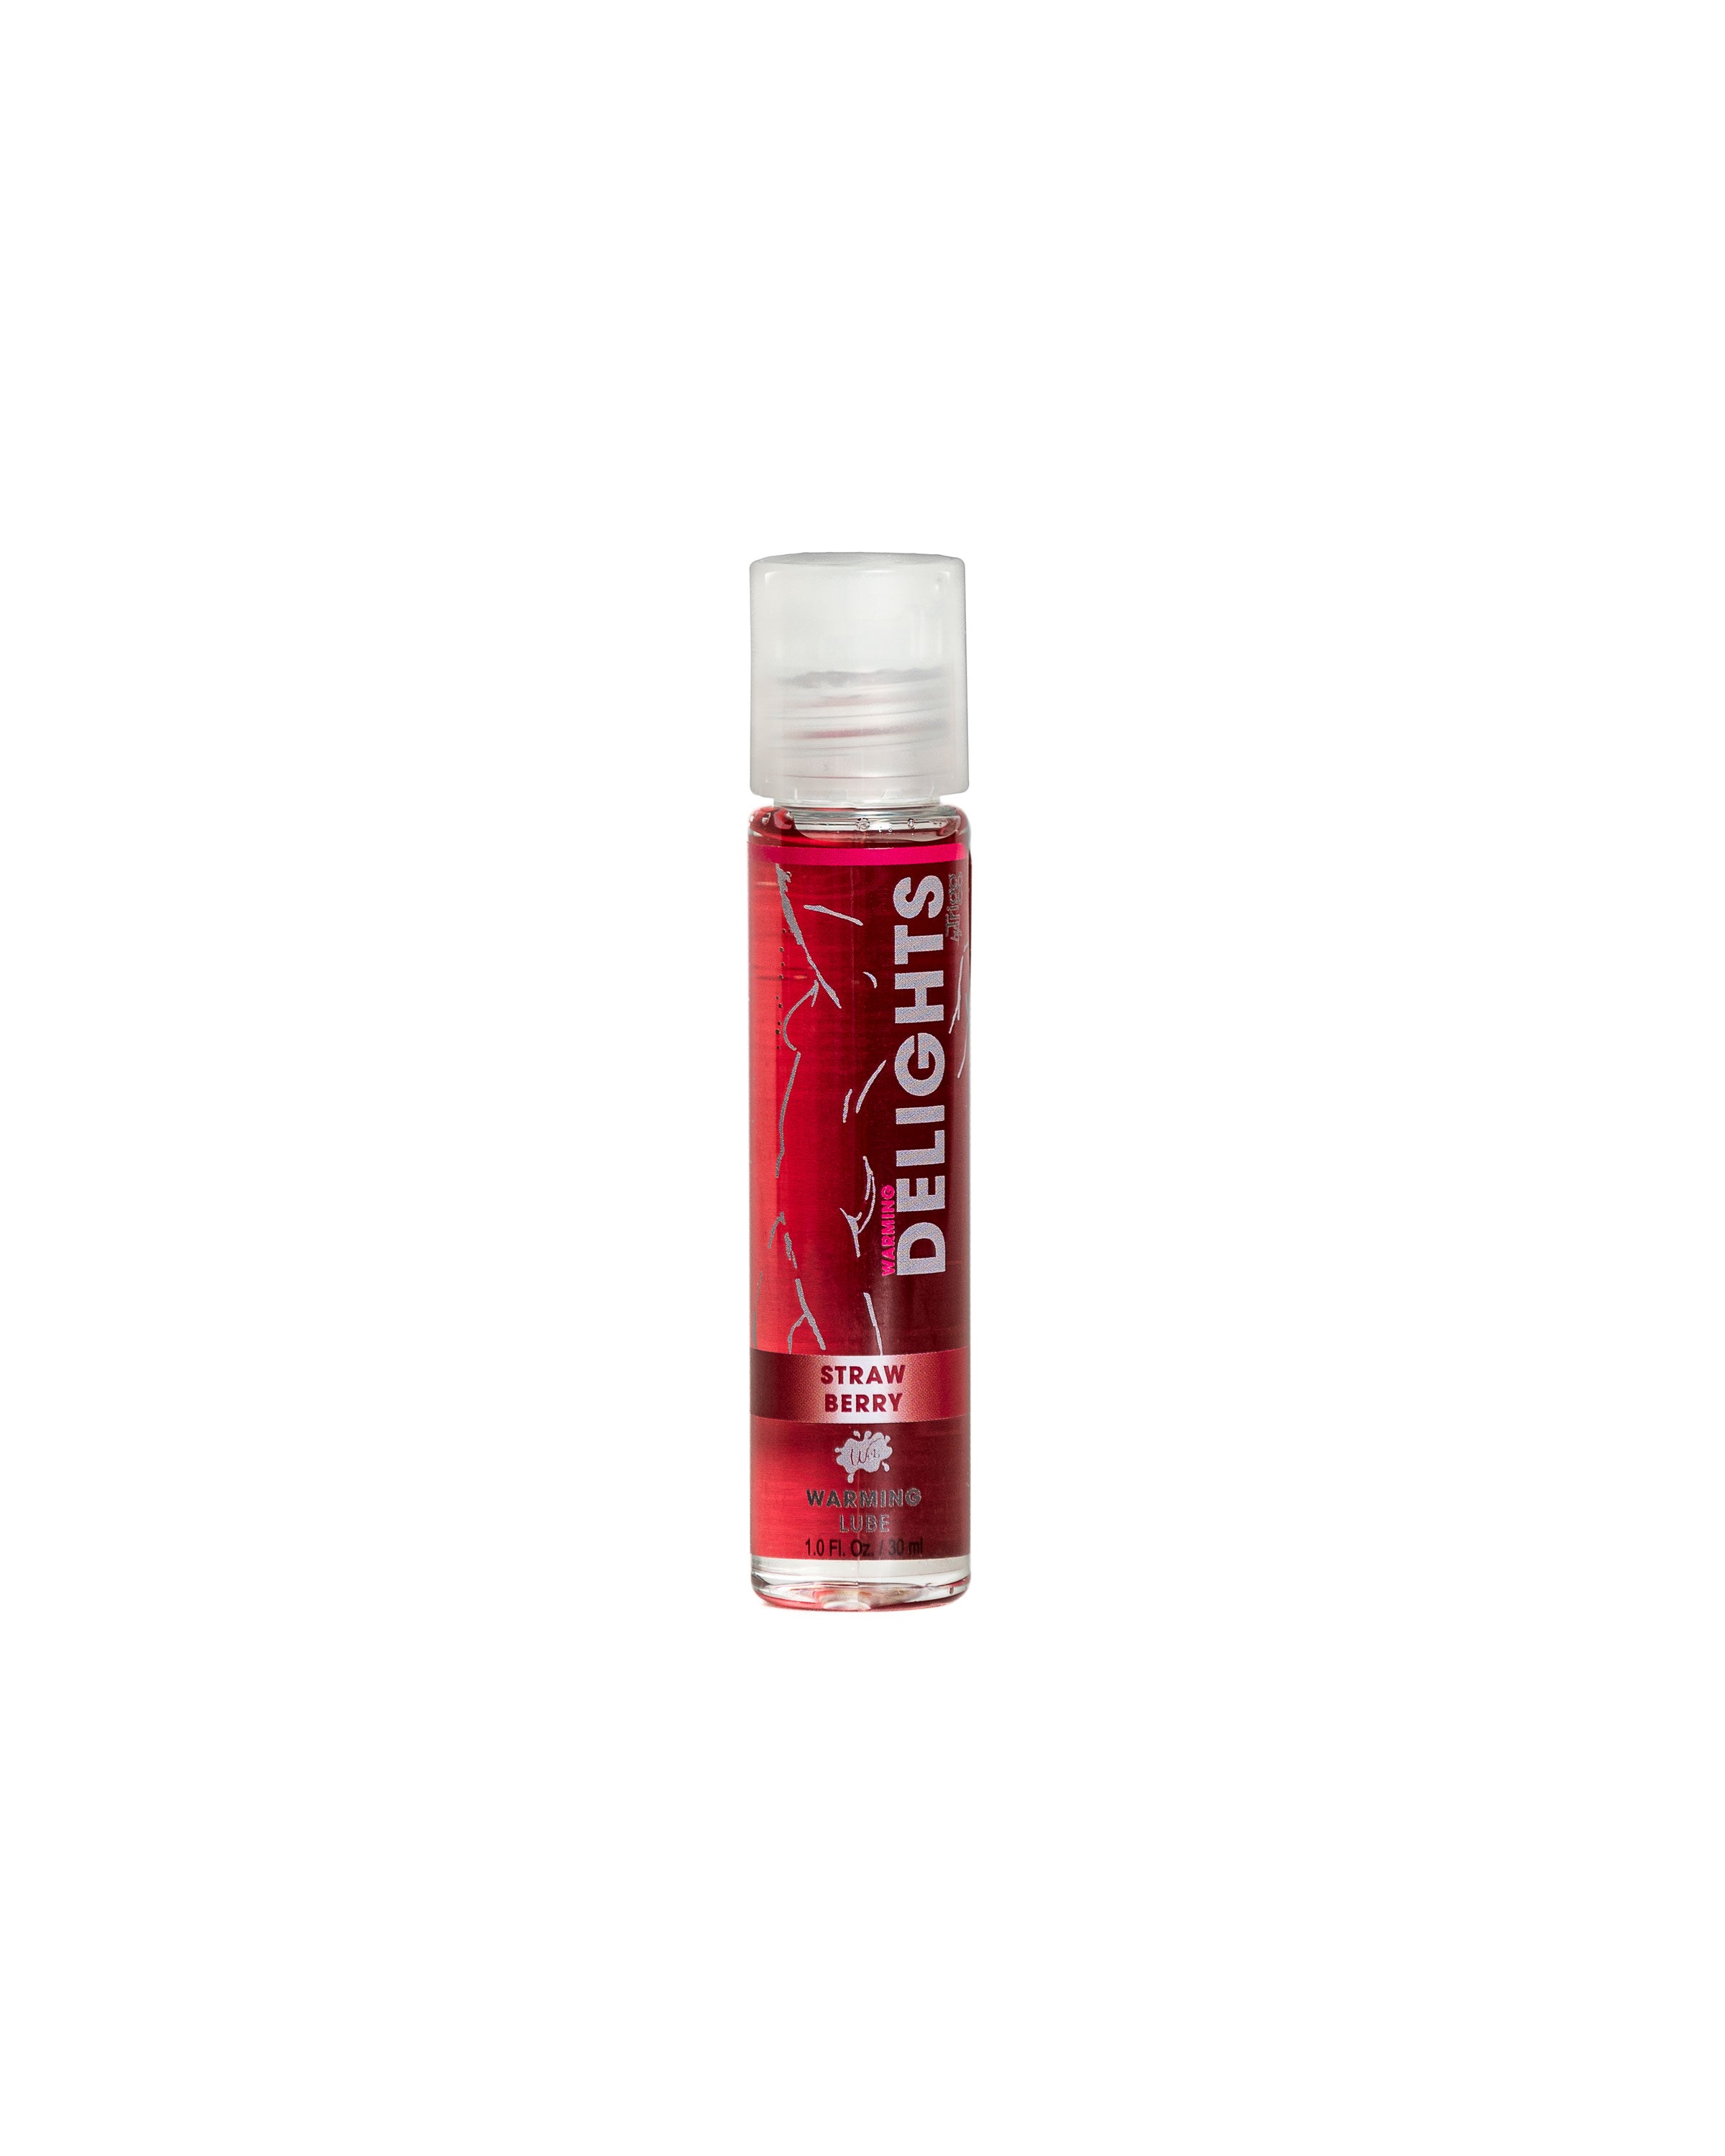 Warming Delights - Strawberry - Flavored Lube 1 Oz-0